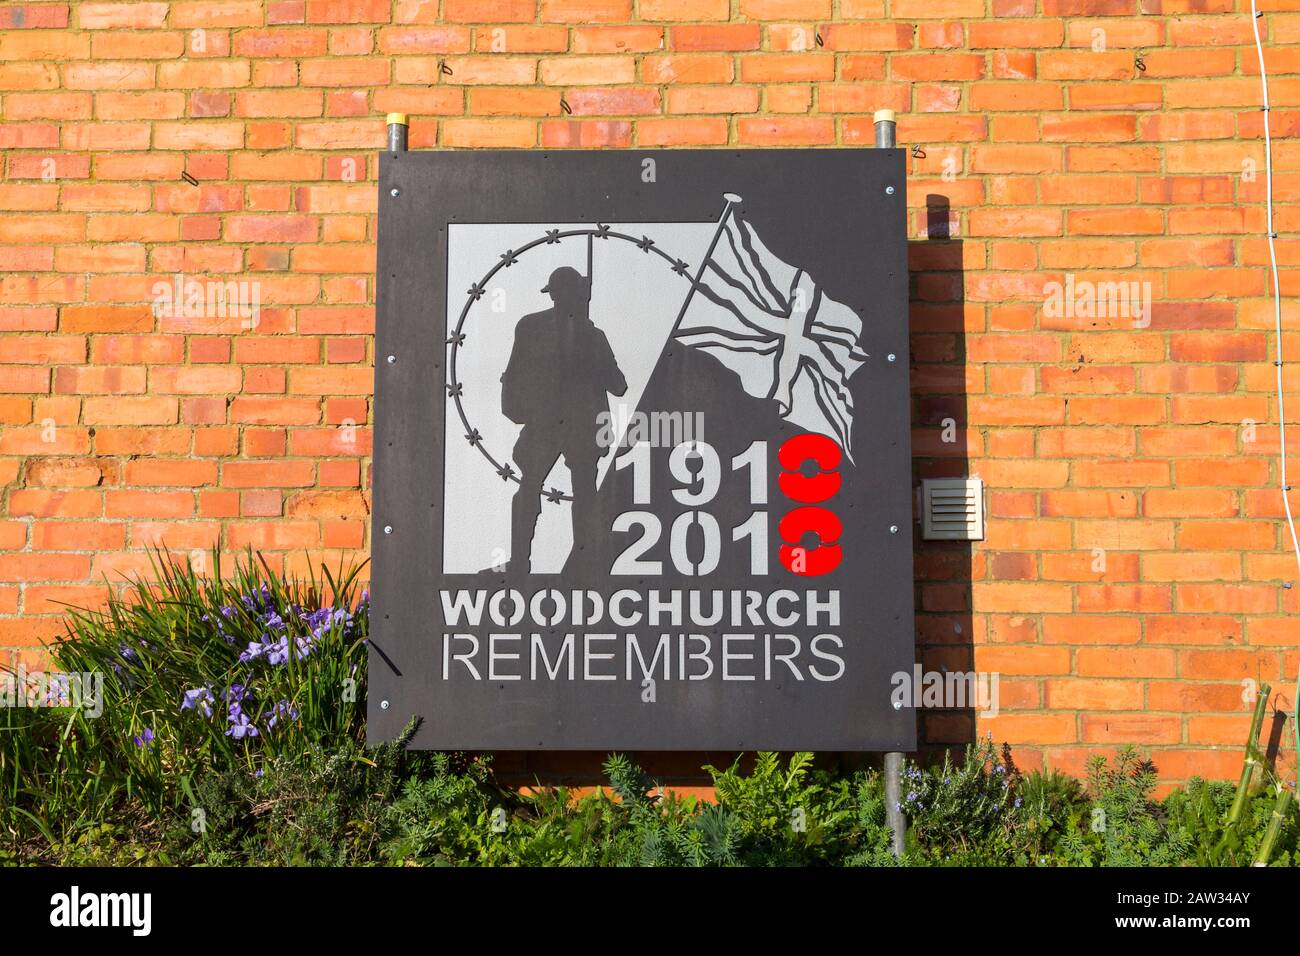 Remembrance day, woodchurch remembers, plaque, kent, uk Stock Photo